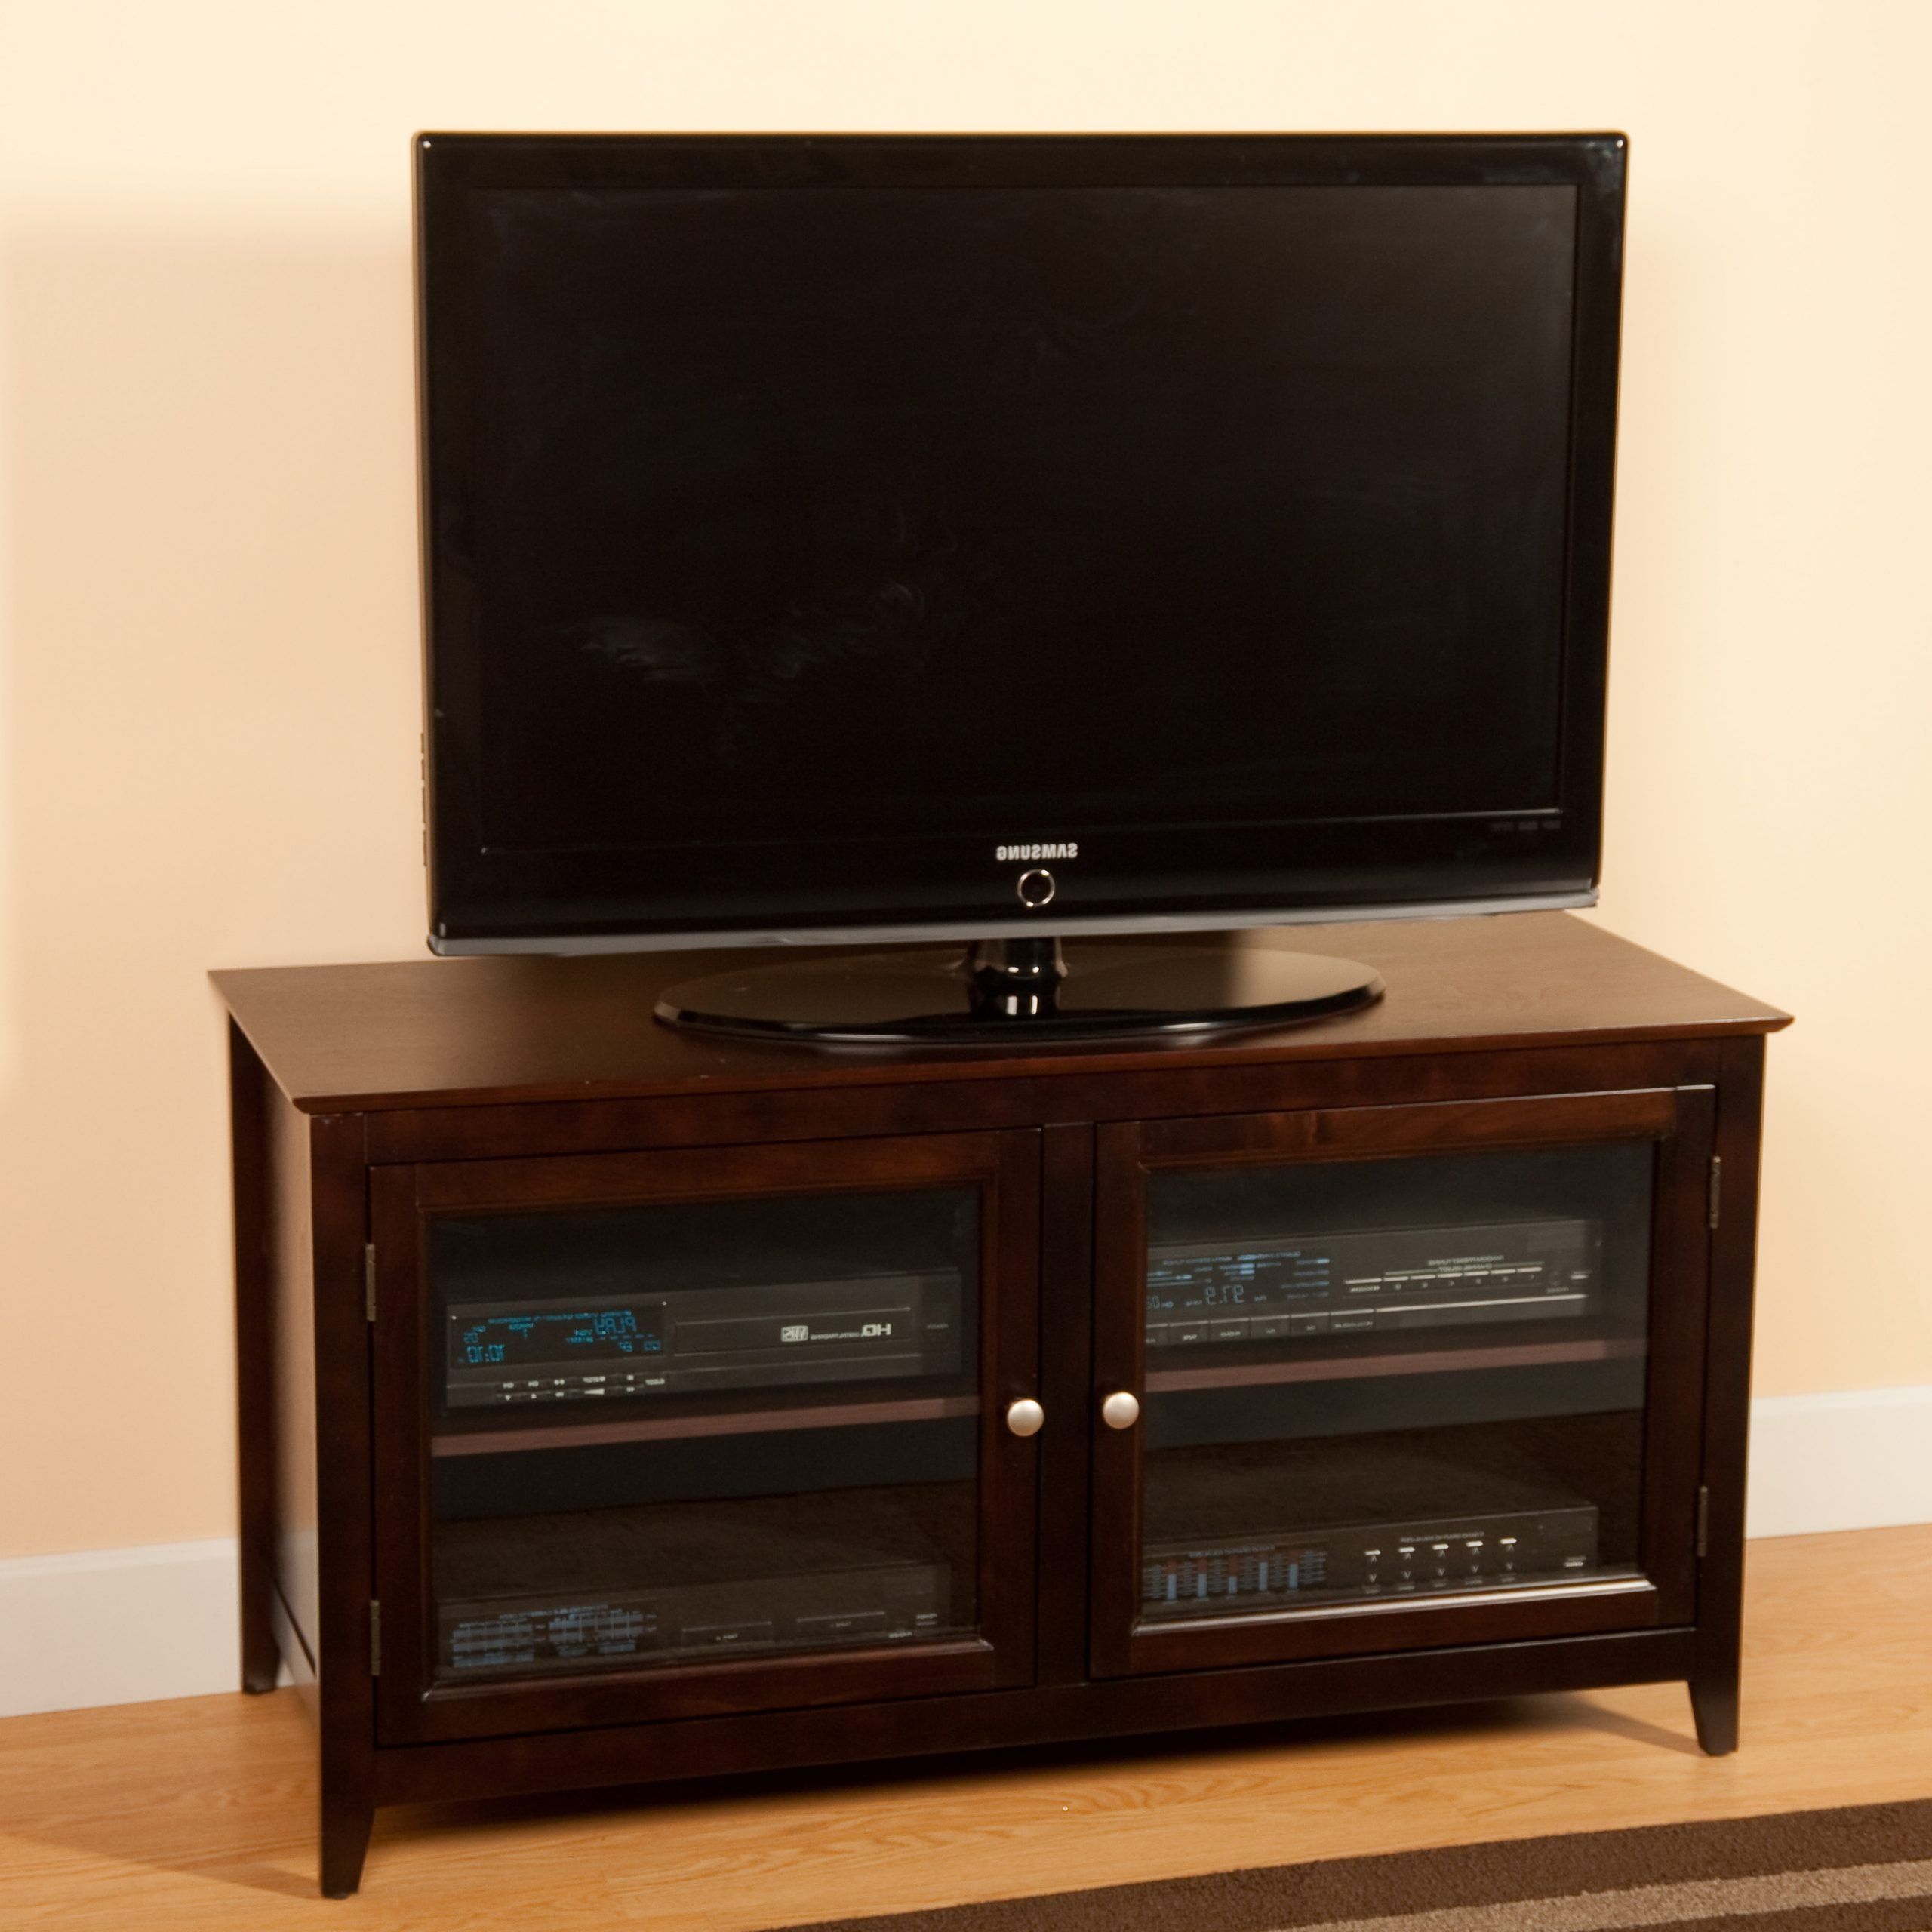 Premier 48 Inch Tv Stand At Hayneedle With Antea Tv Stands For Tvs Up To 48&quot; (View 8 of 20)